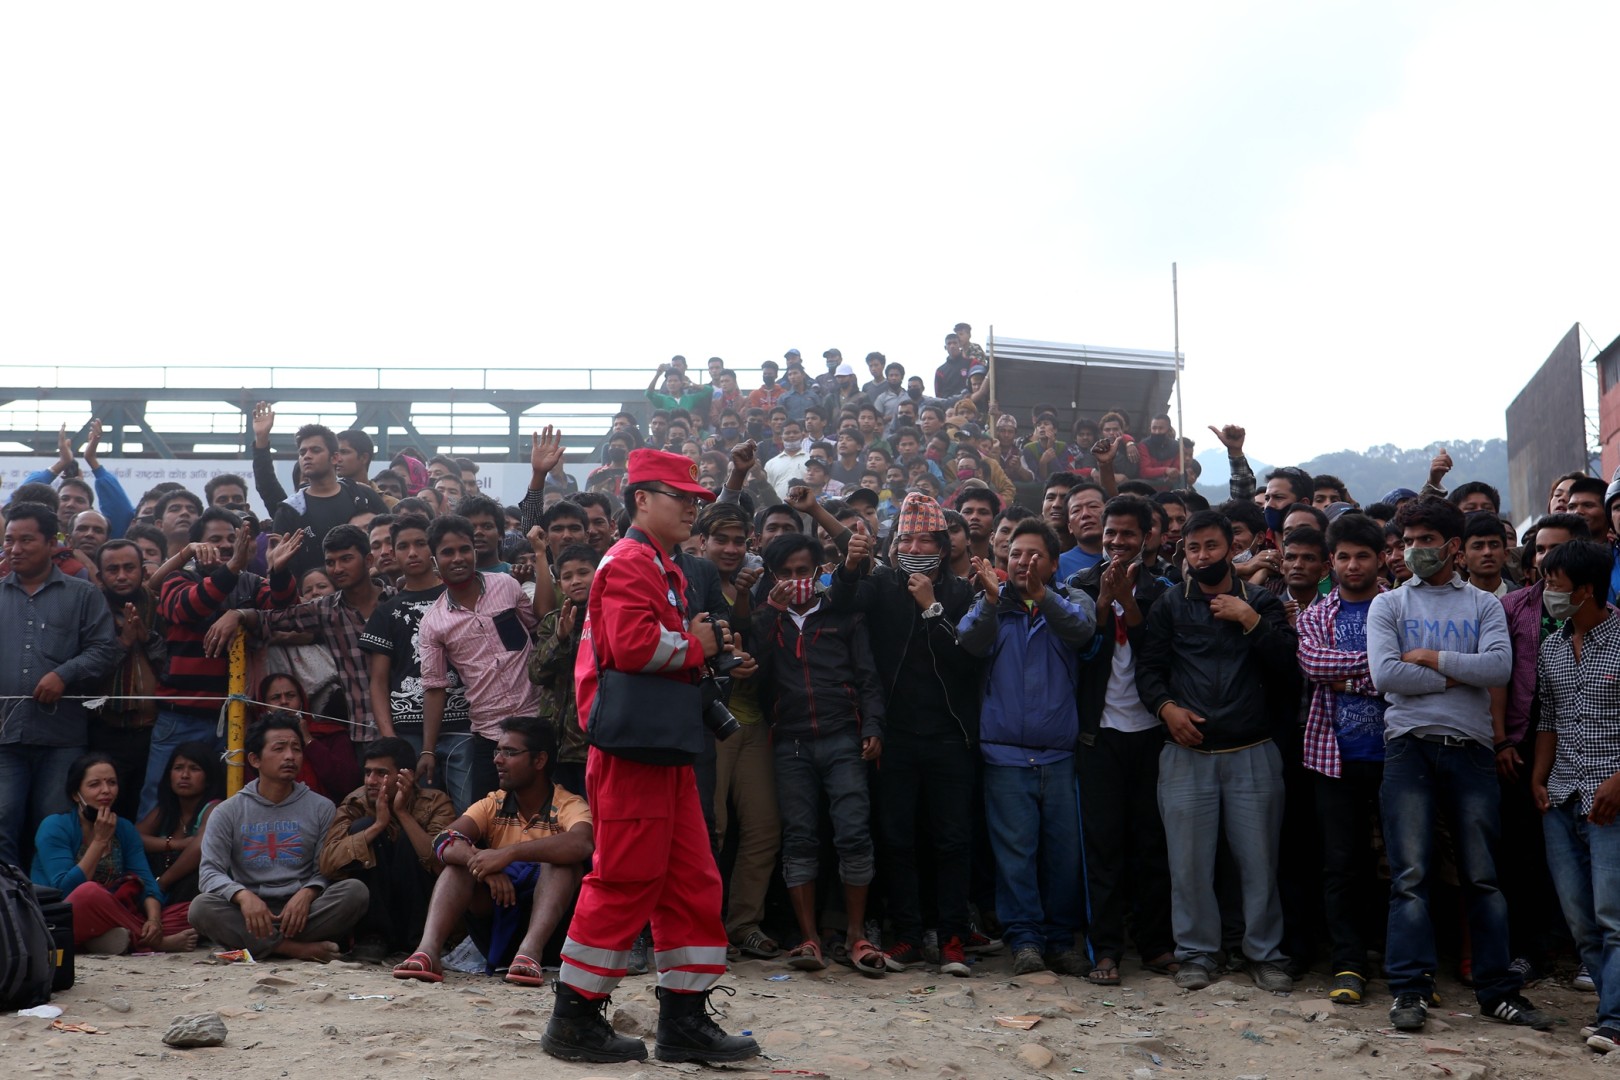 Nepalese cheer after China International Search and Rescue Team rescued a survior in Kathmandu, capital of Nepal, on April 26, 2015. China International Search and Rescue Team rescued the first survivor during its humanitarian mission following a fatal quake in Nepal. (Xinhua/Bai Yang)